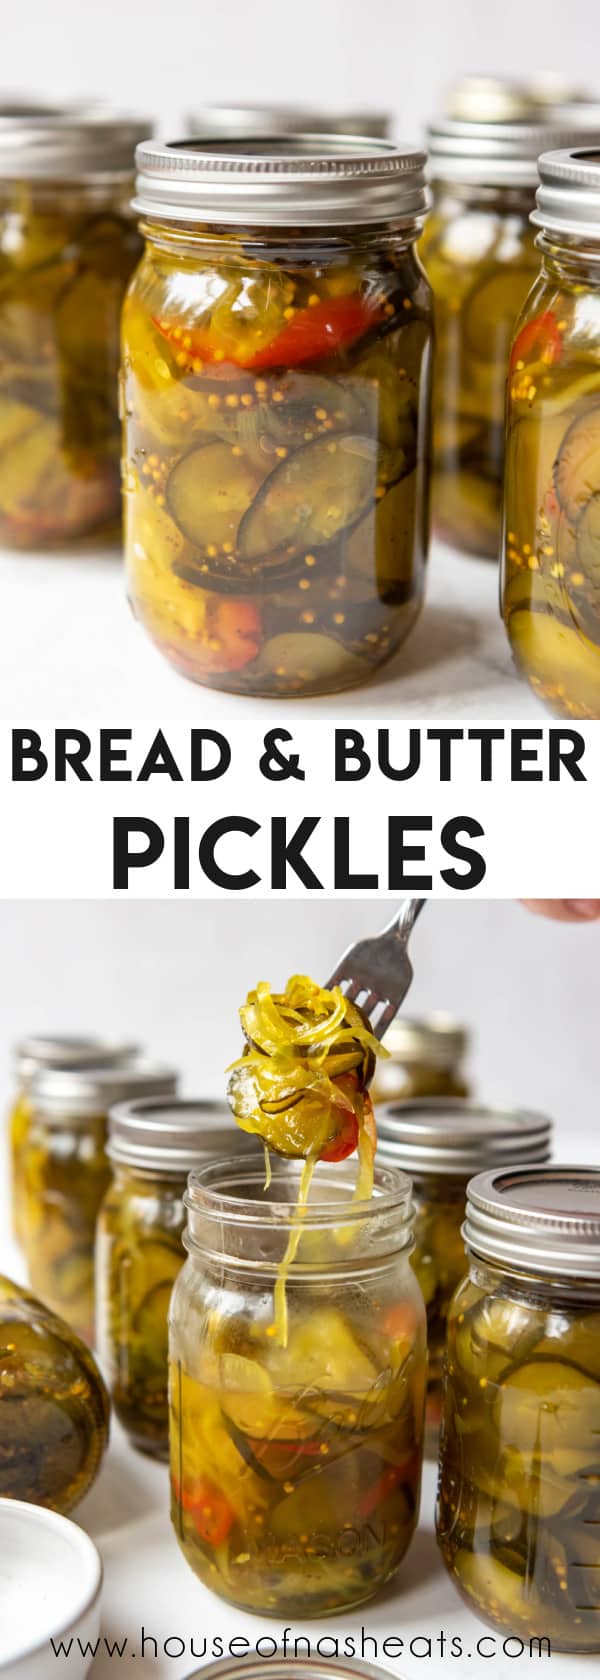 A collage of images of jars of bread & butter pickles with text overlay.